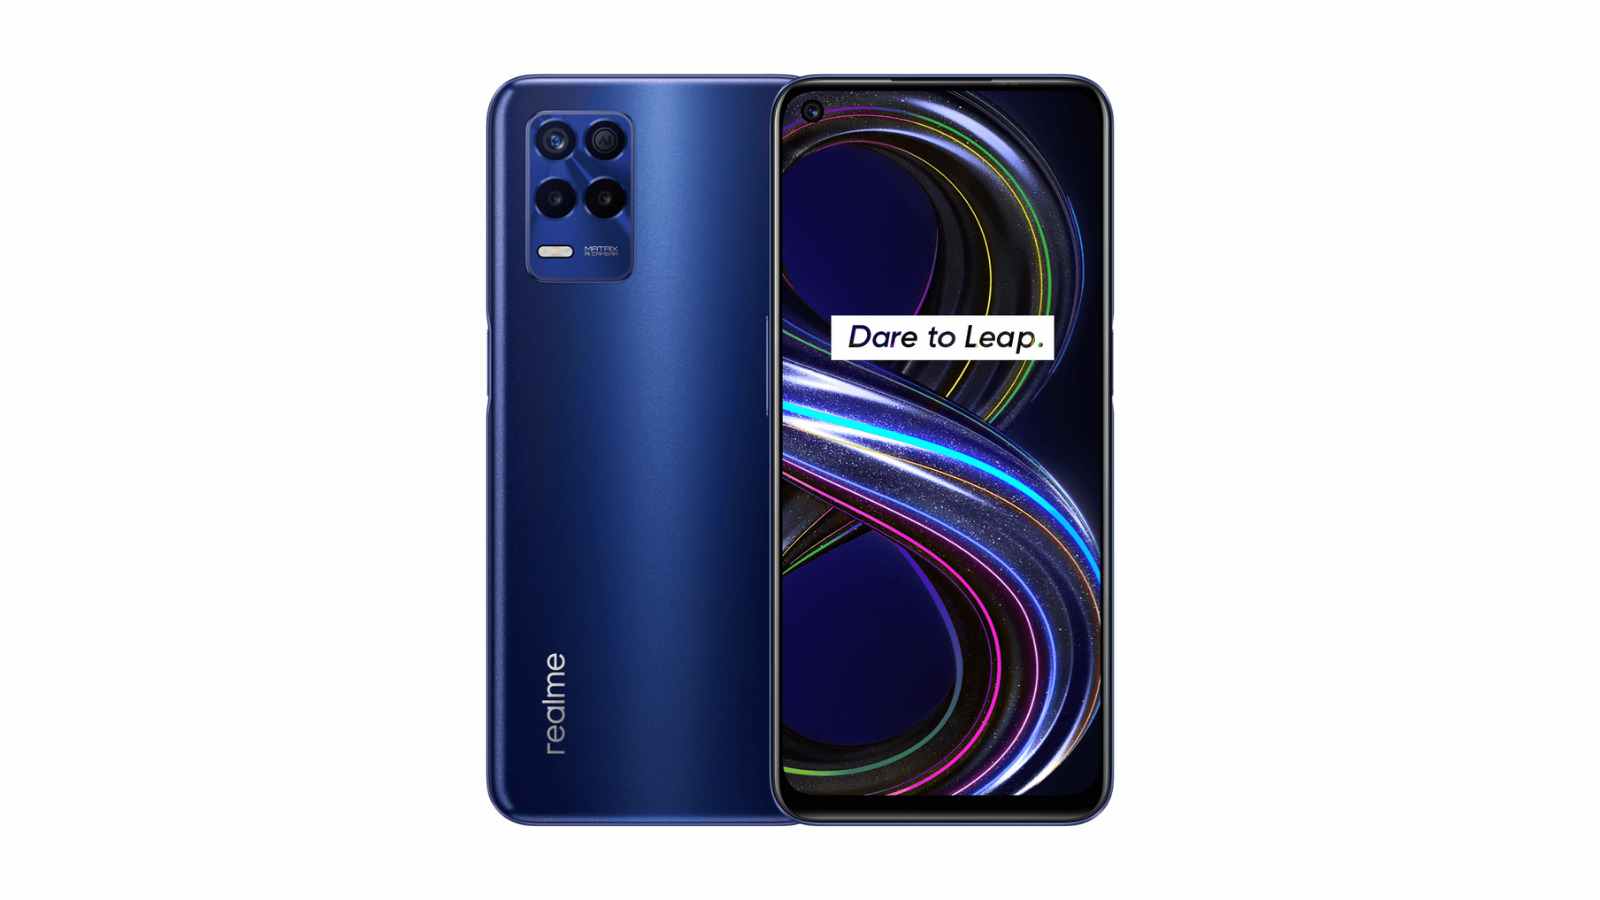 Realme 8s 5G with MediaTek Dimensity 810,90Hz fast refresh rate launched in India: Price, Specifications